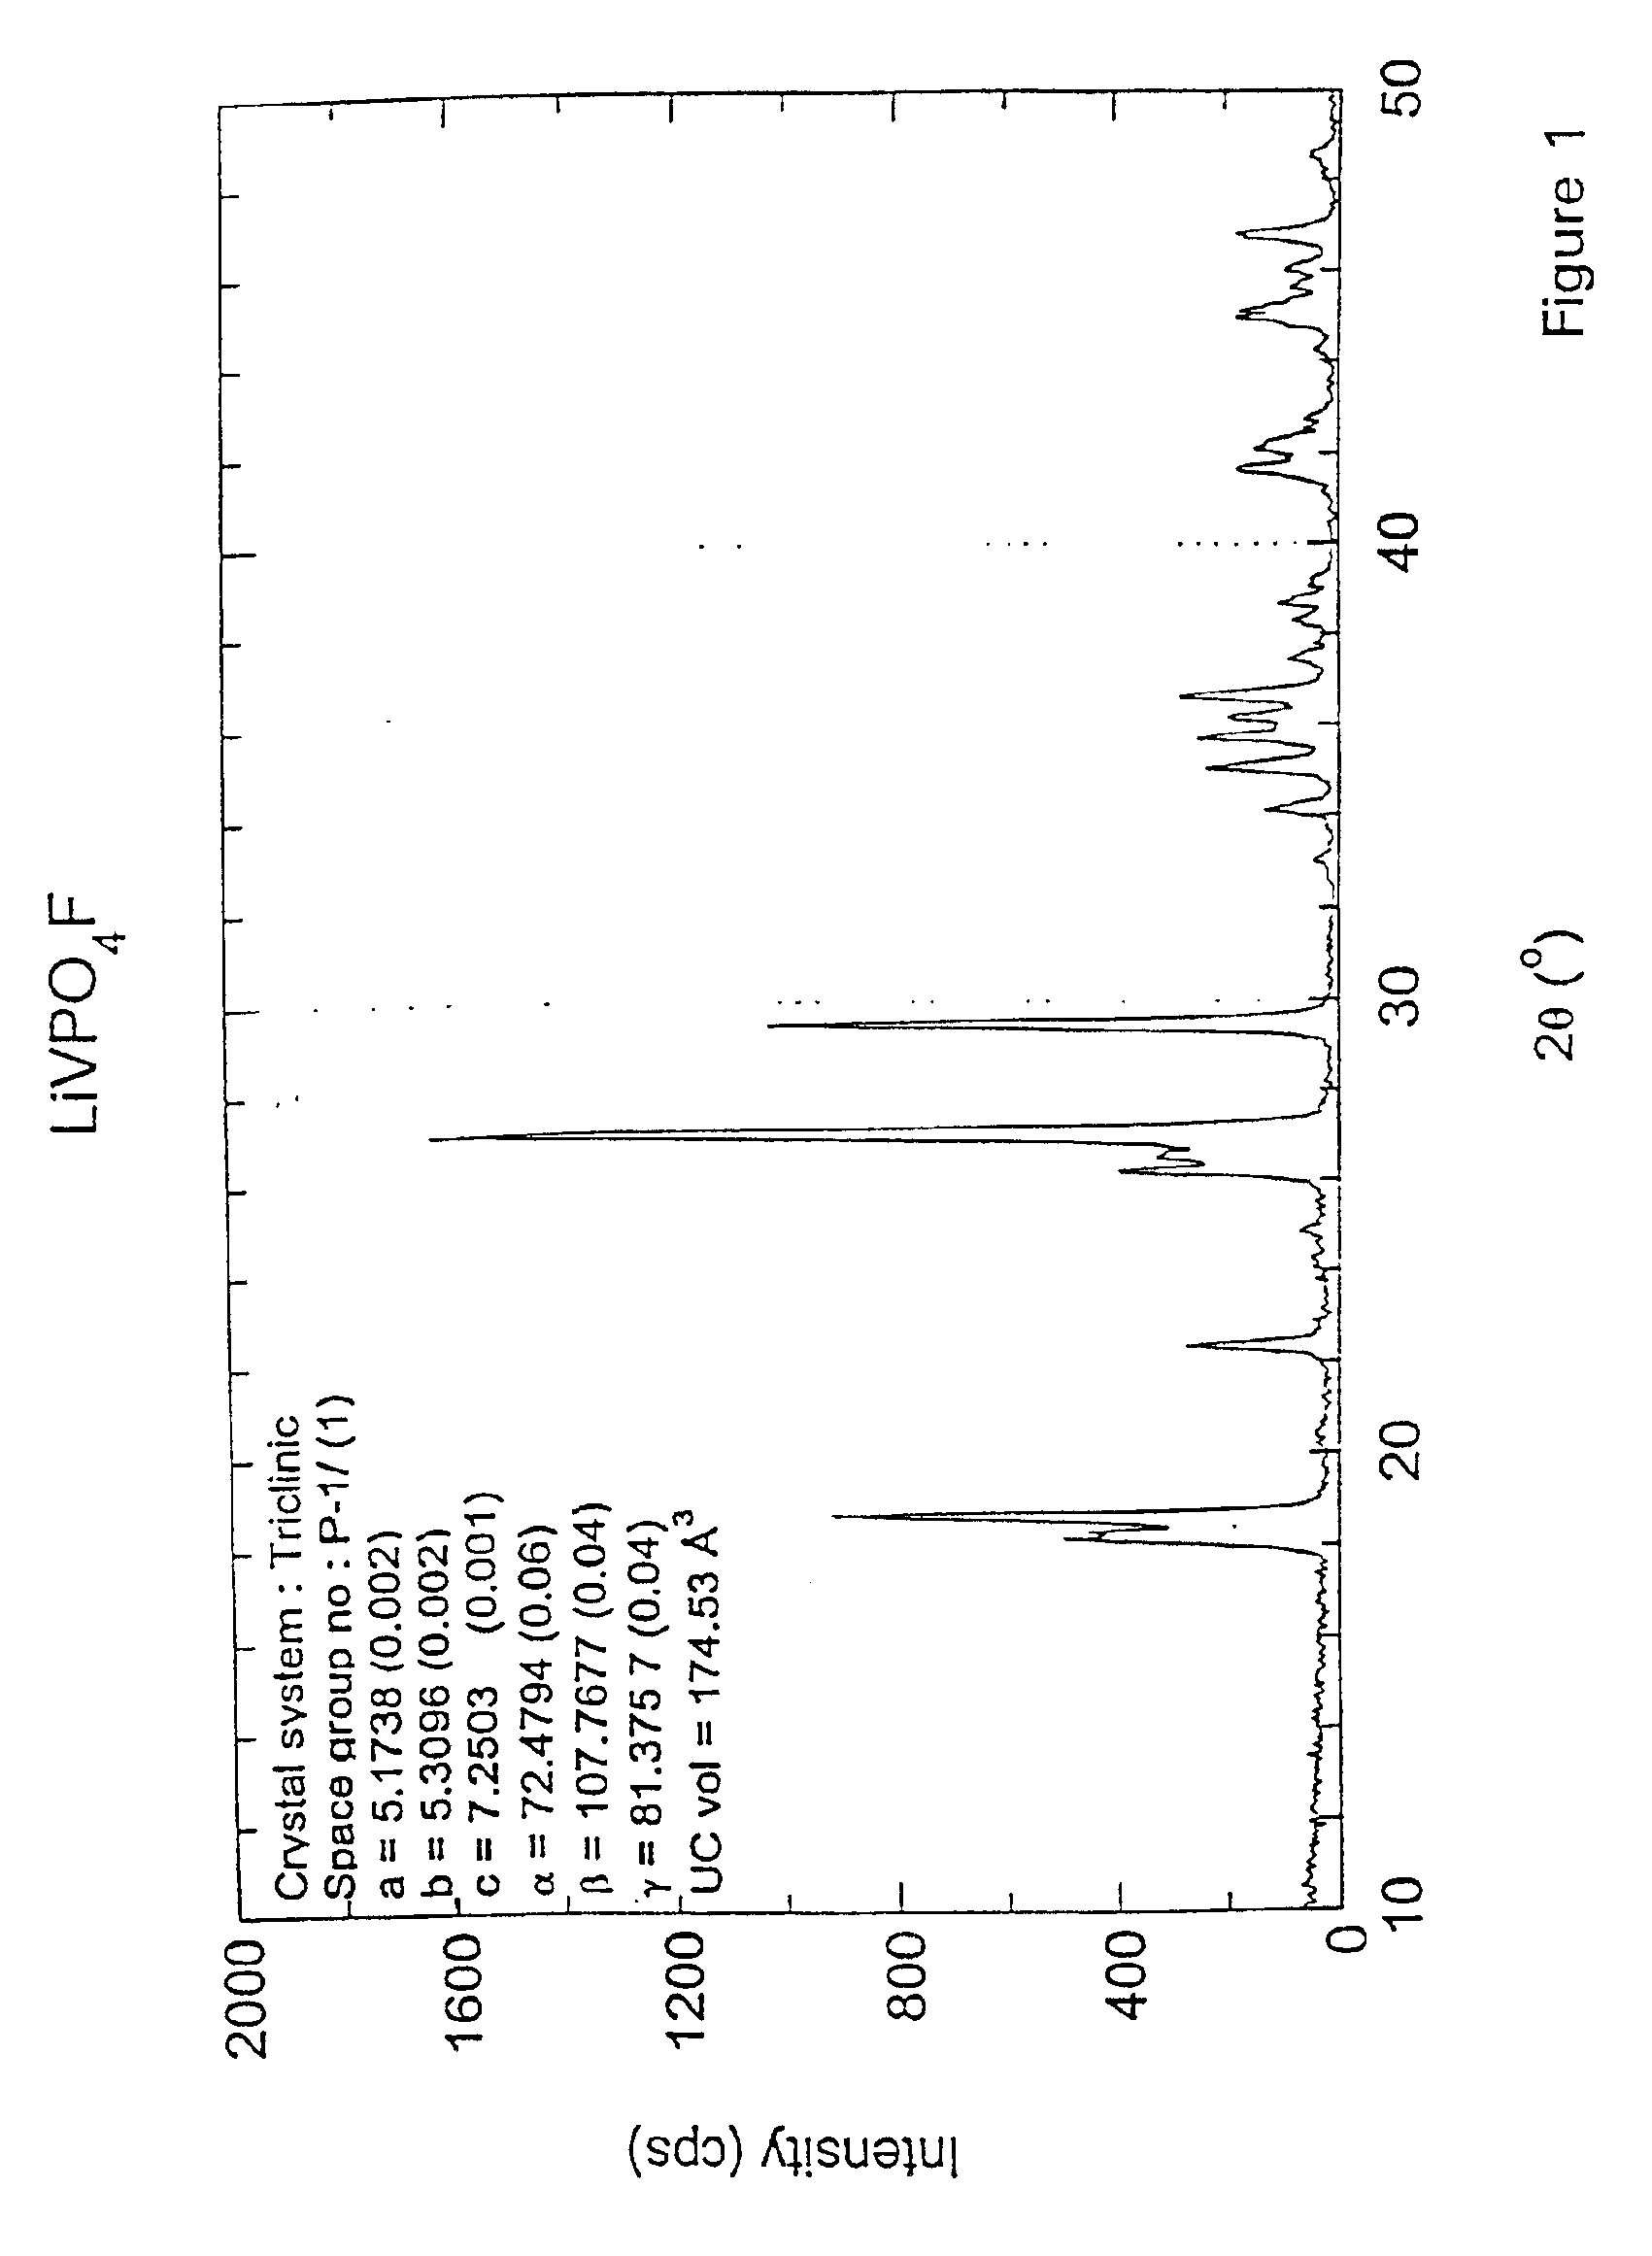 Lithium metal fluorophosphate materials and preparation thereof